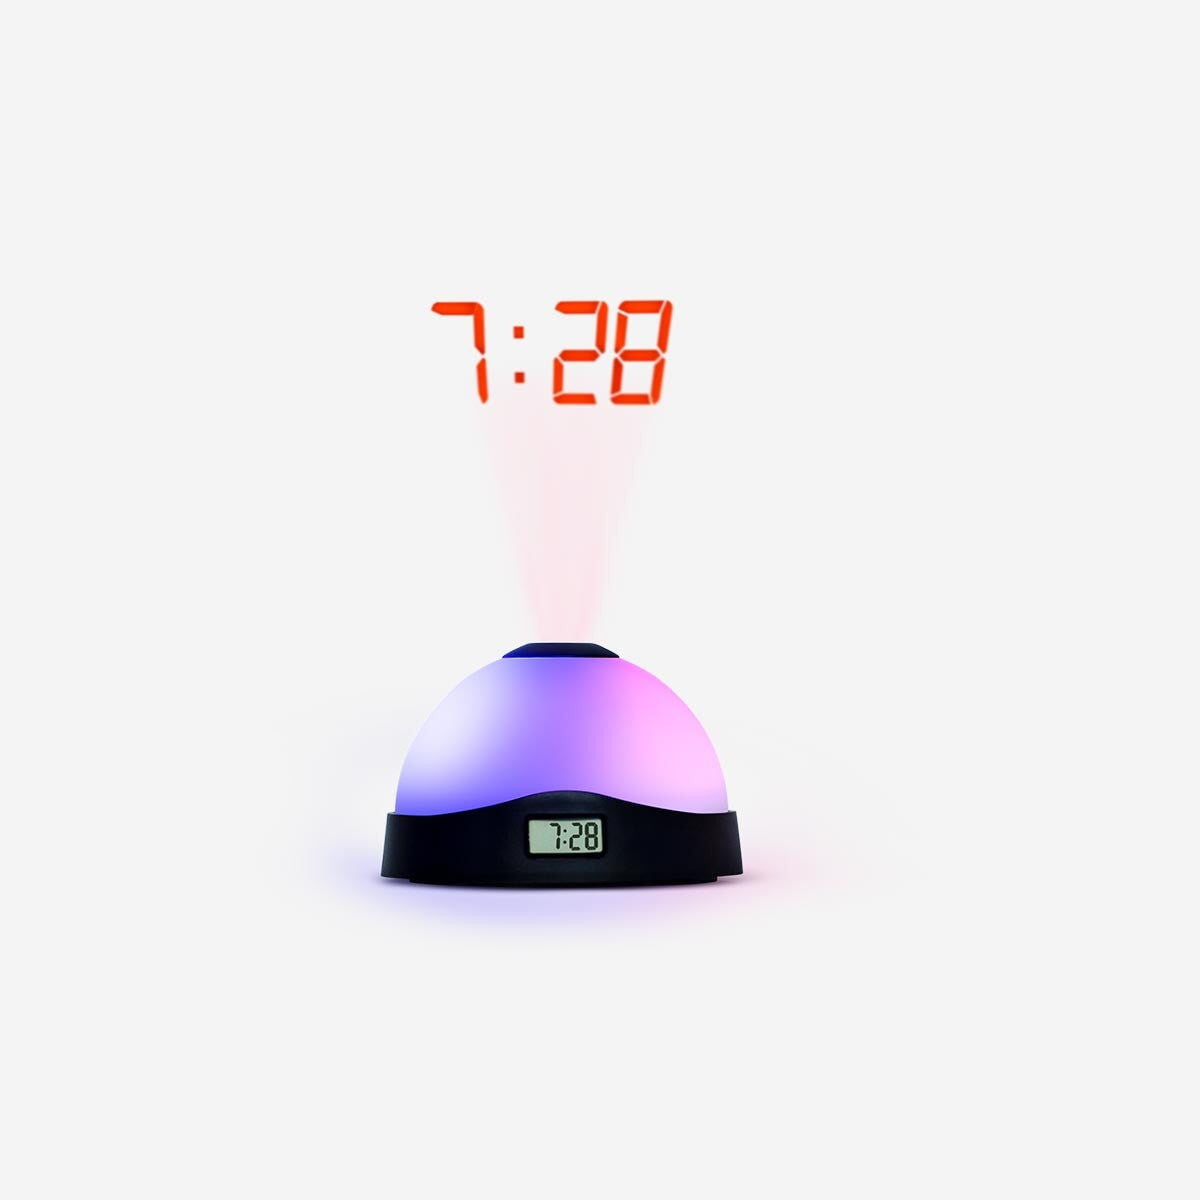 Image of Alarm clock with projector